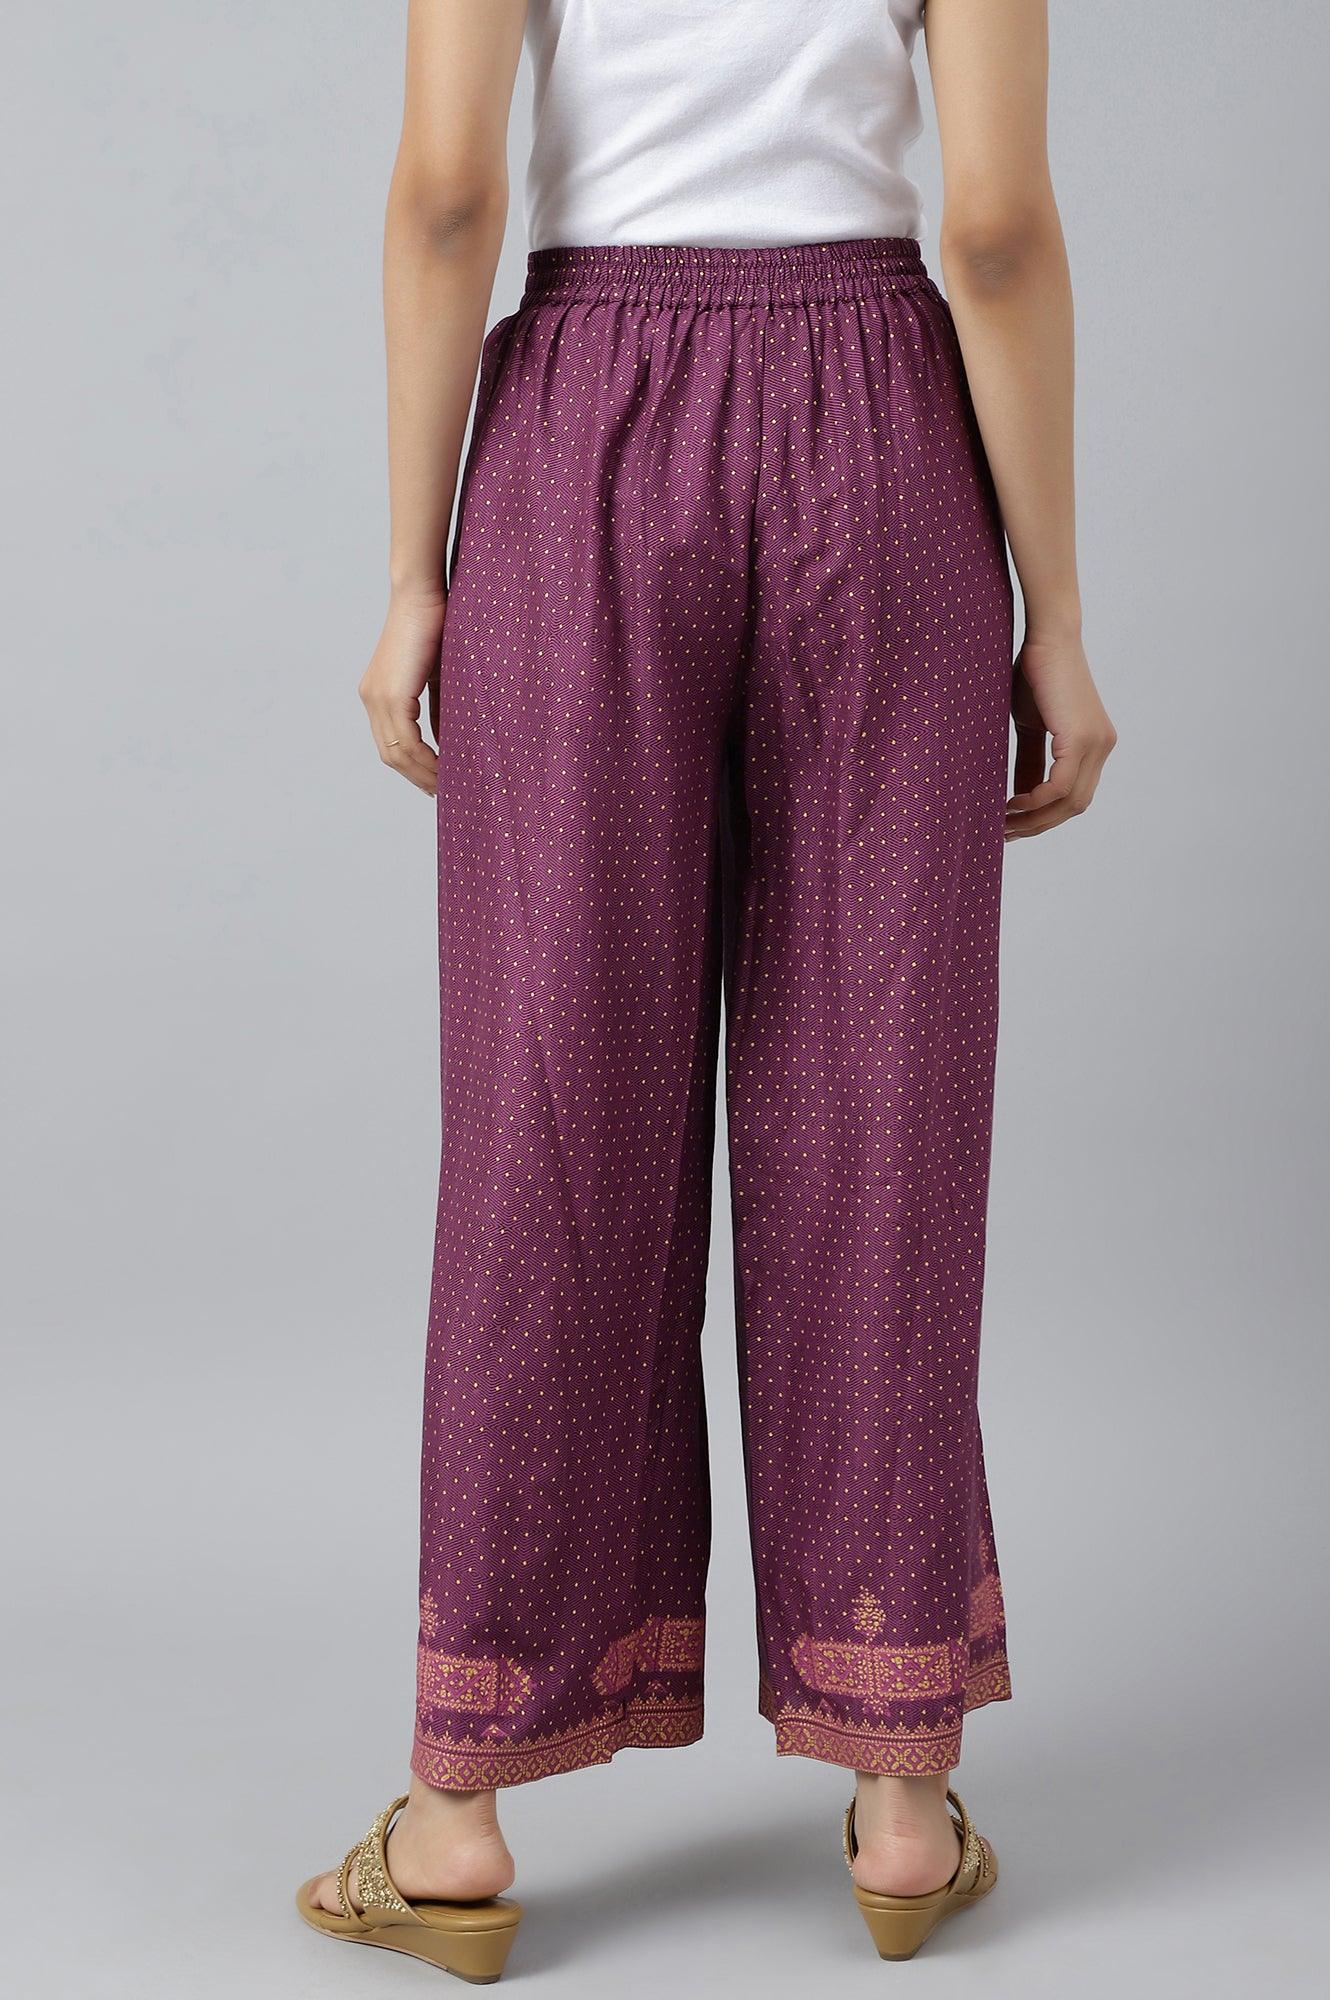 Orchid Purple Rayon Printed Parallel Pants - wforwoman